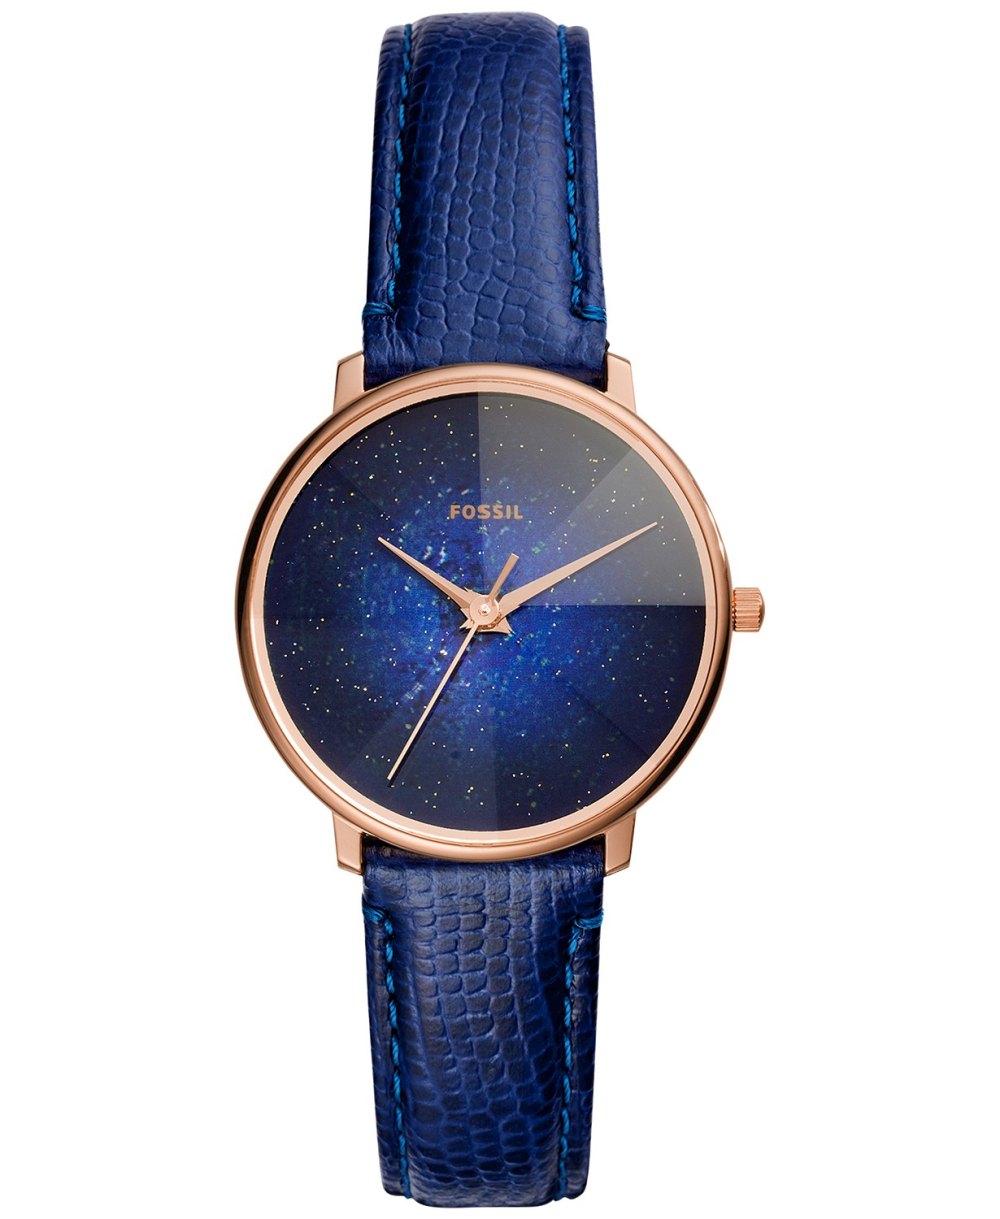 Fossil Women's Galaxy Leather Strap Watch Collection, 33mm (Blue)